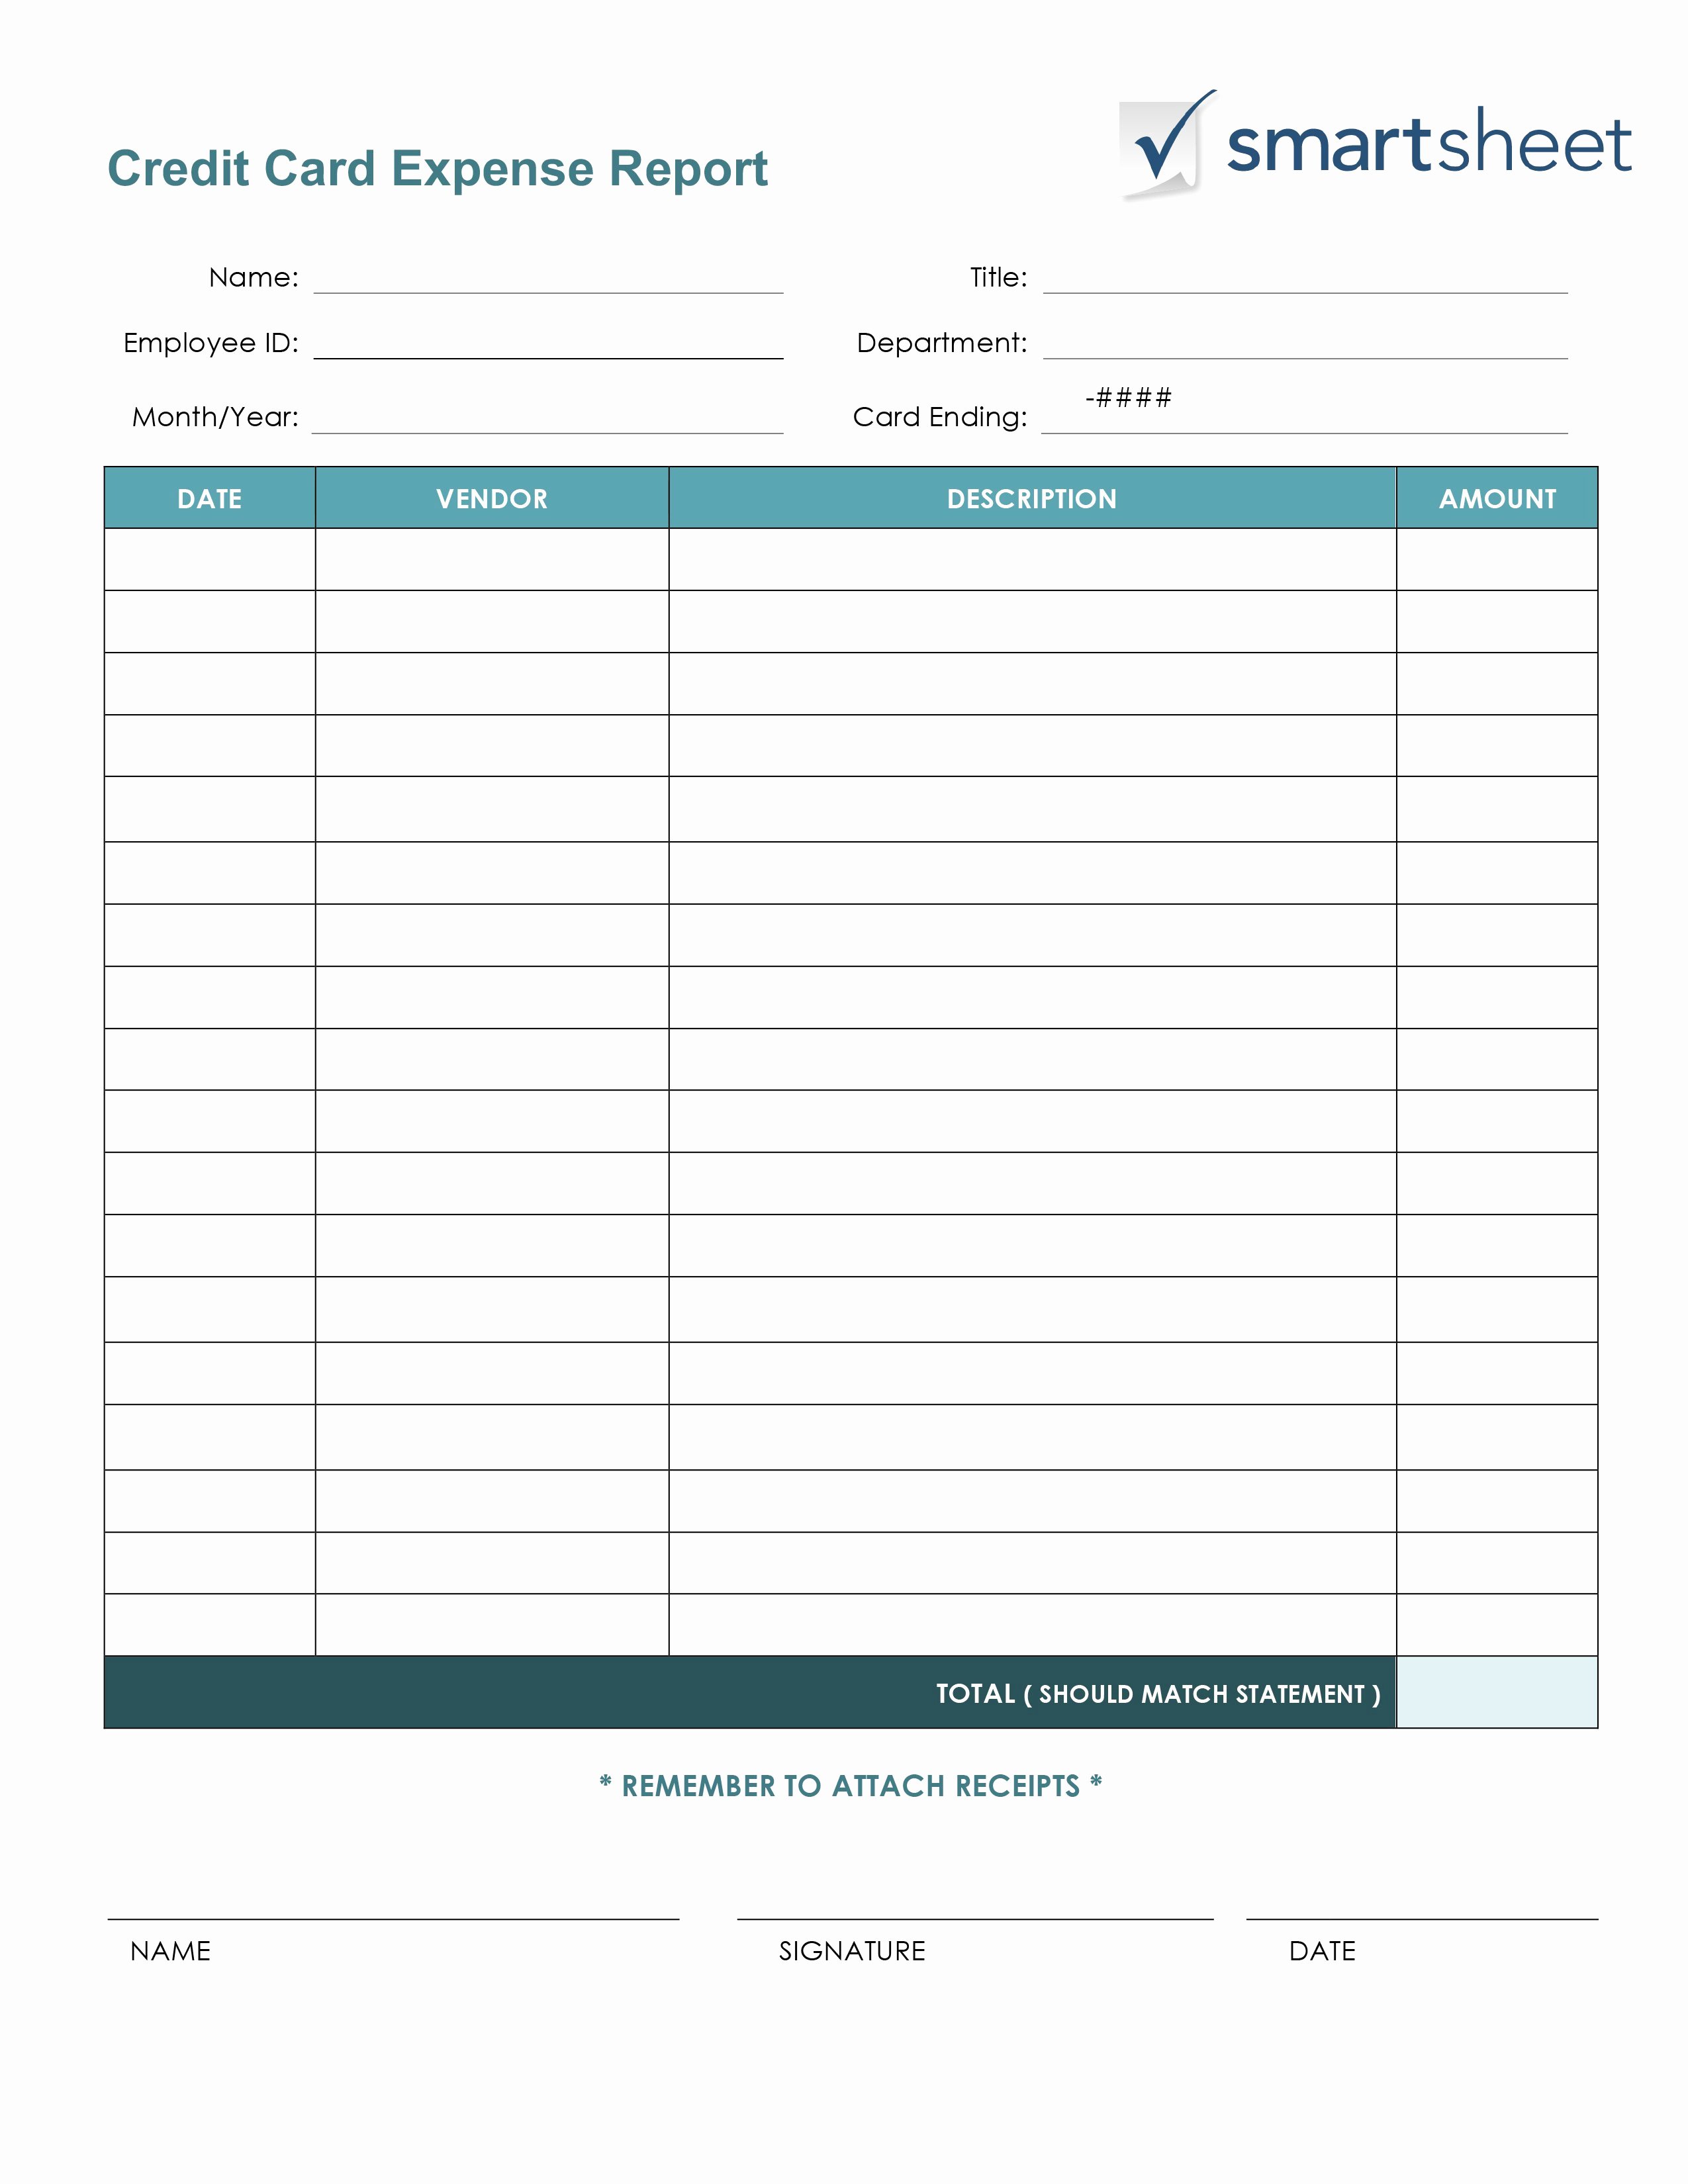 Expense Report Template Excel Lovely Free Expense Report Templates Smartsheet